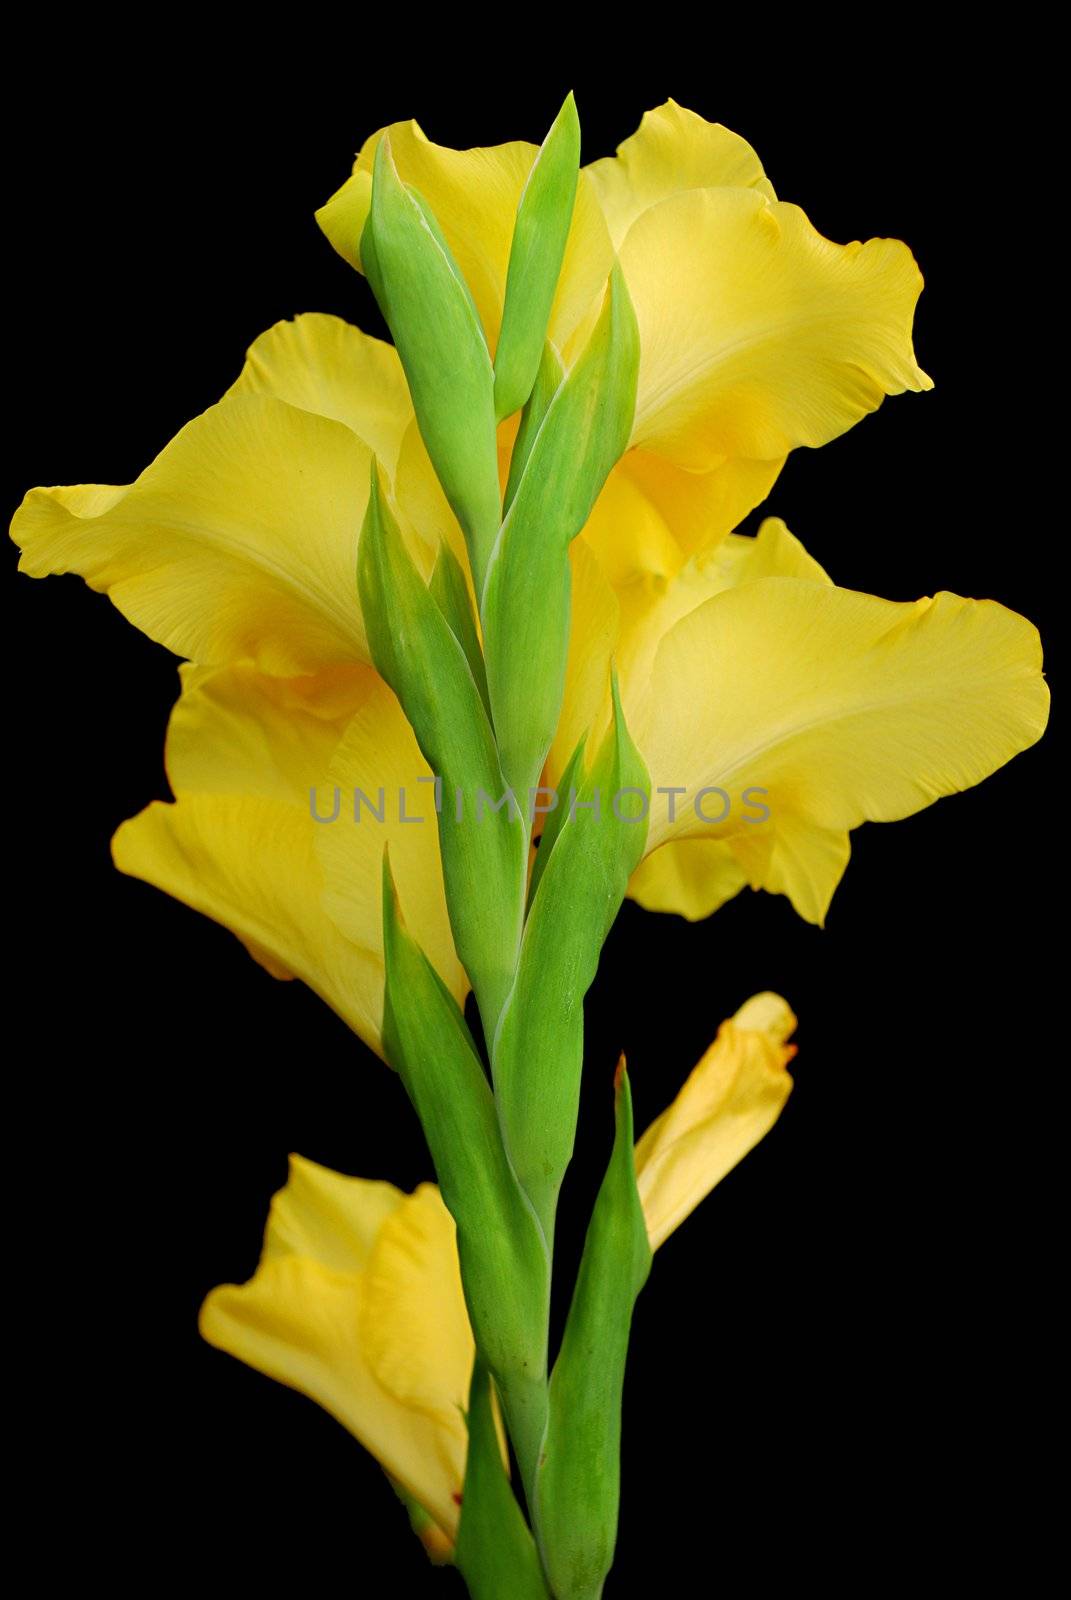 yellow gladioluses are isolated apeak standings